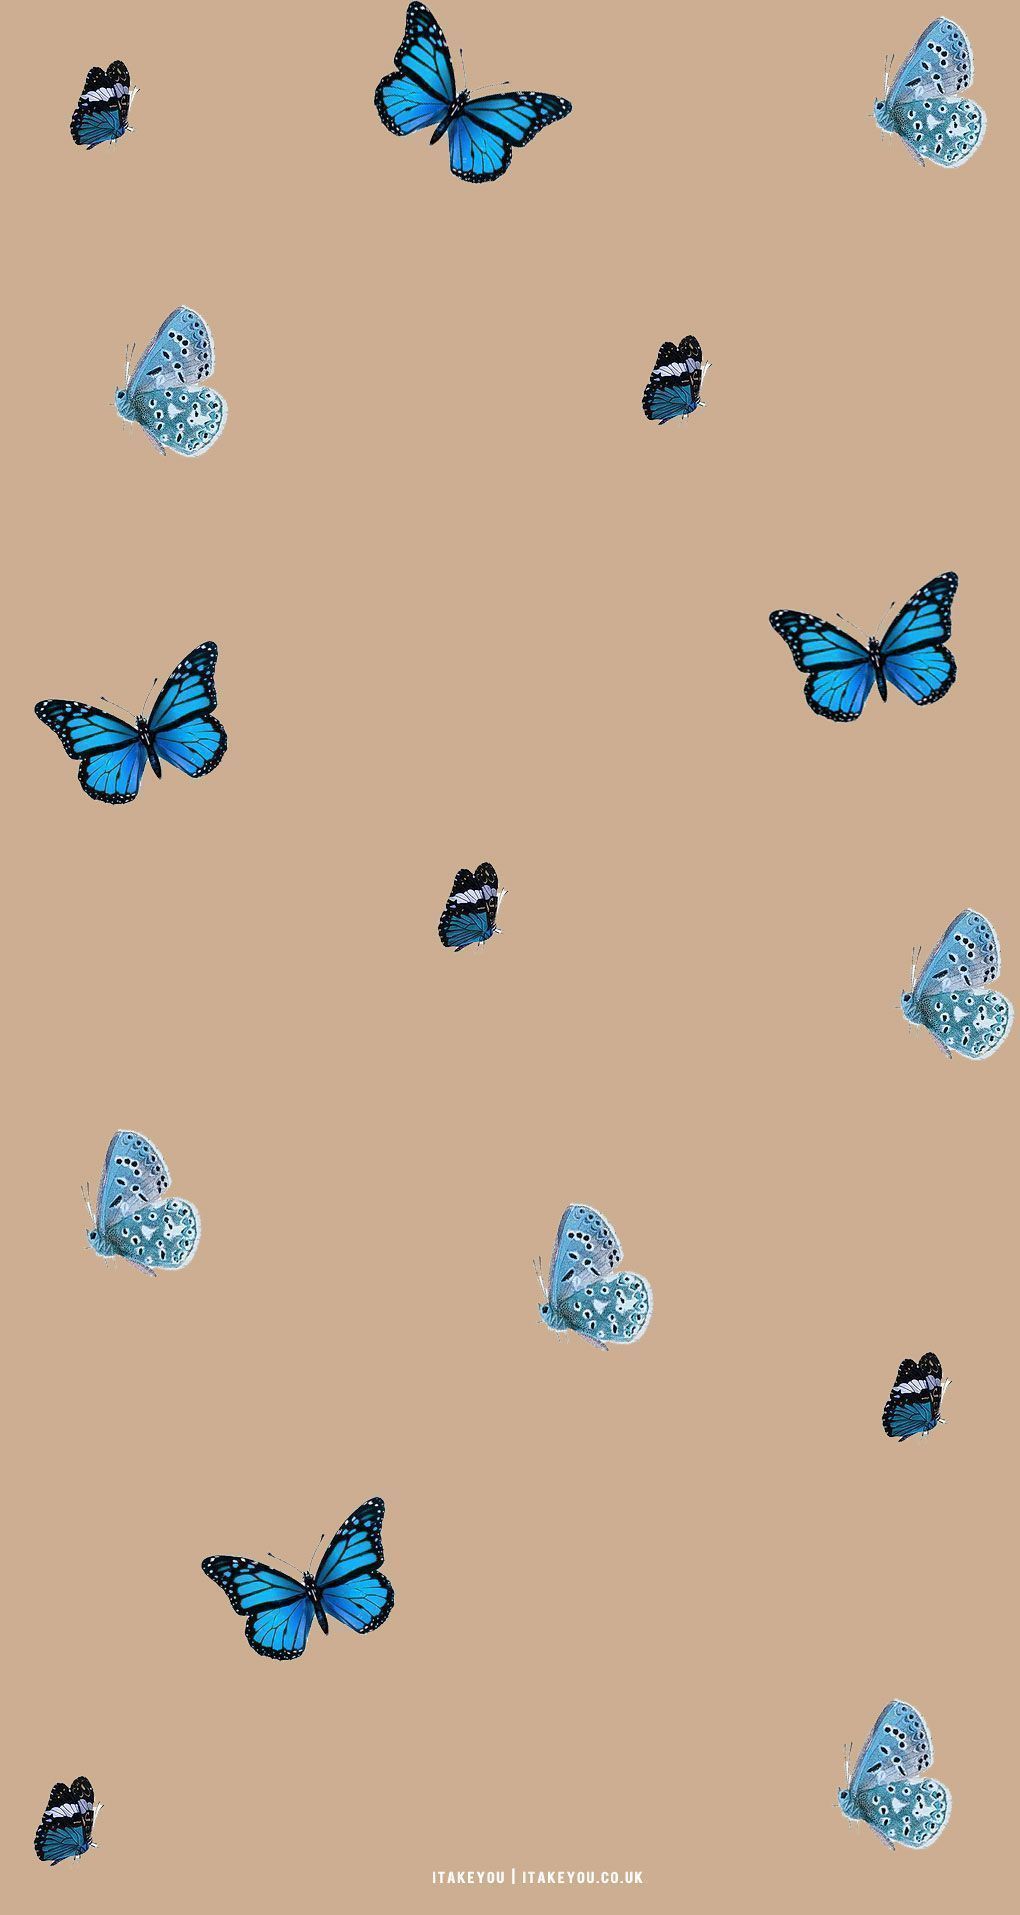 Aesthetic butterfly wallpaper for phone background. - Phone, cute, smile, cool, butterfly, Vogue, summer, pretty, colorful